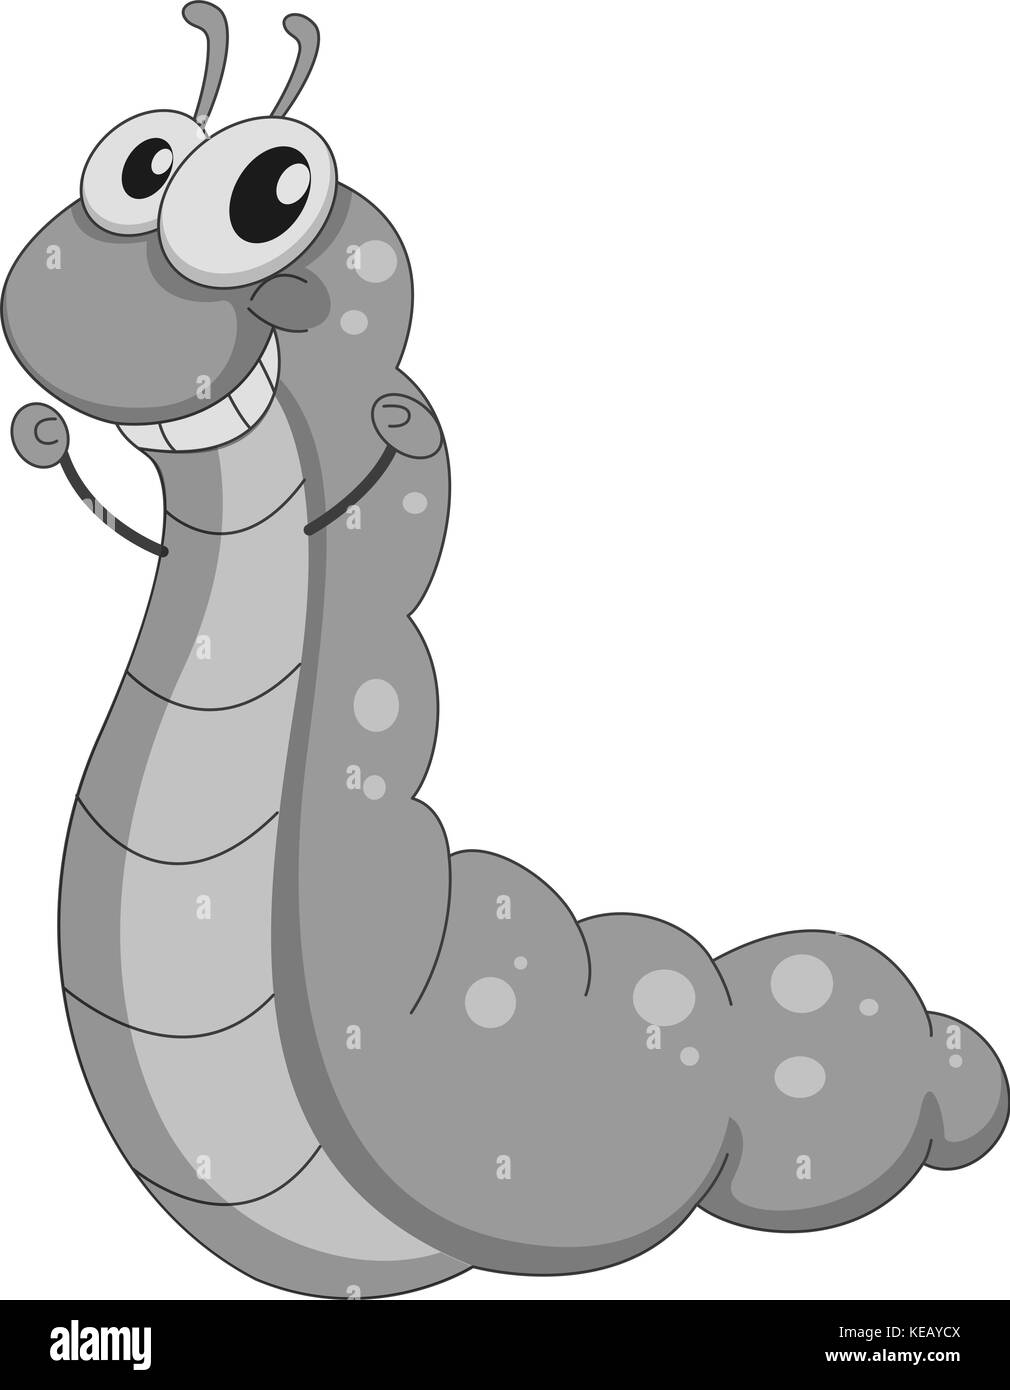 Worm standing alone smiling on a white background Stock Vector